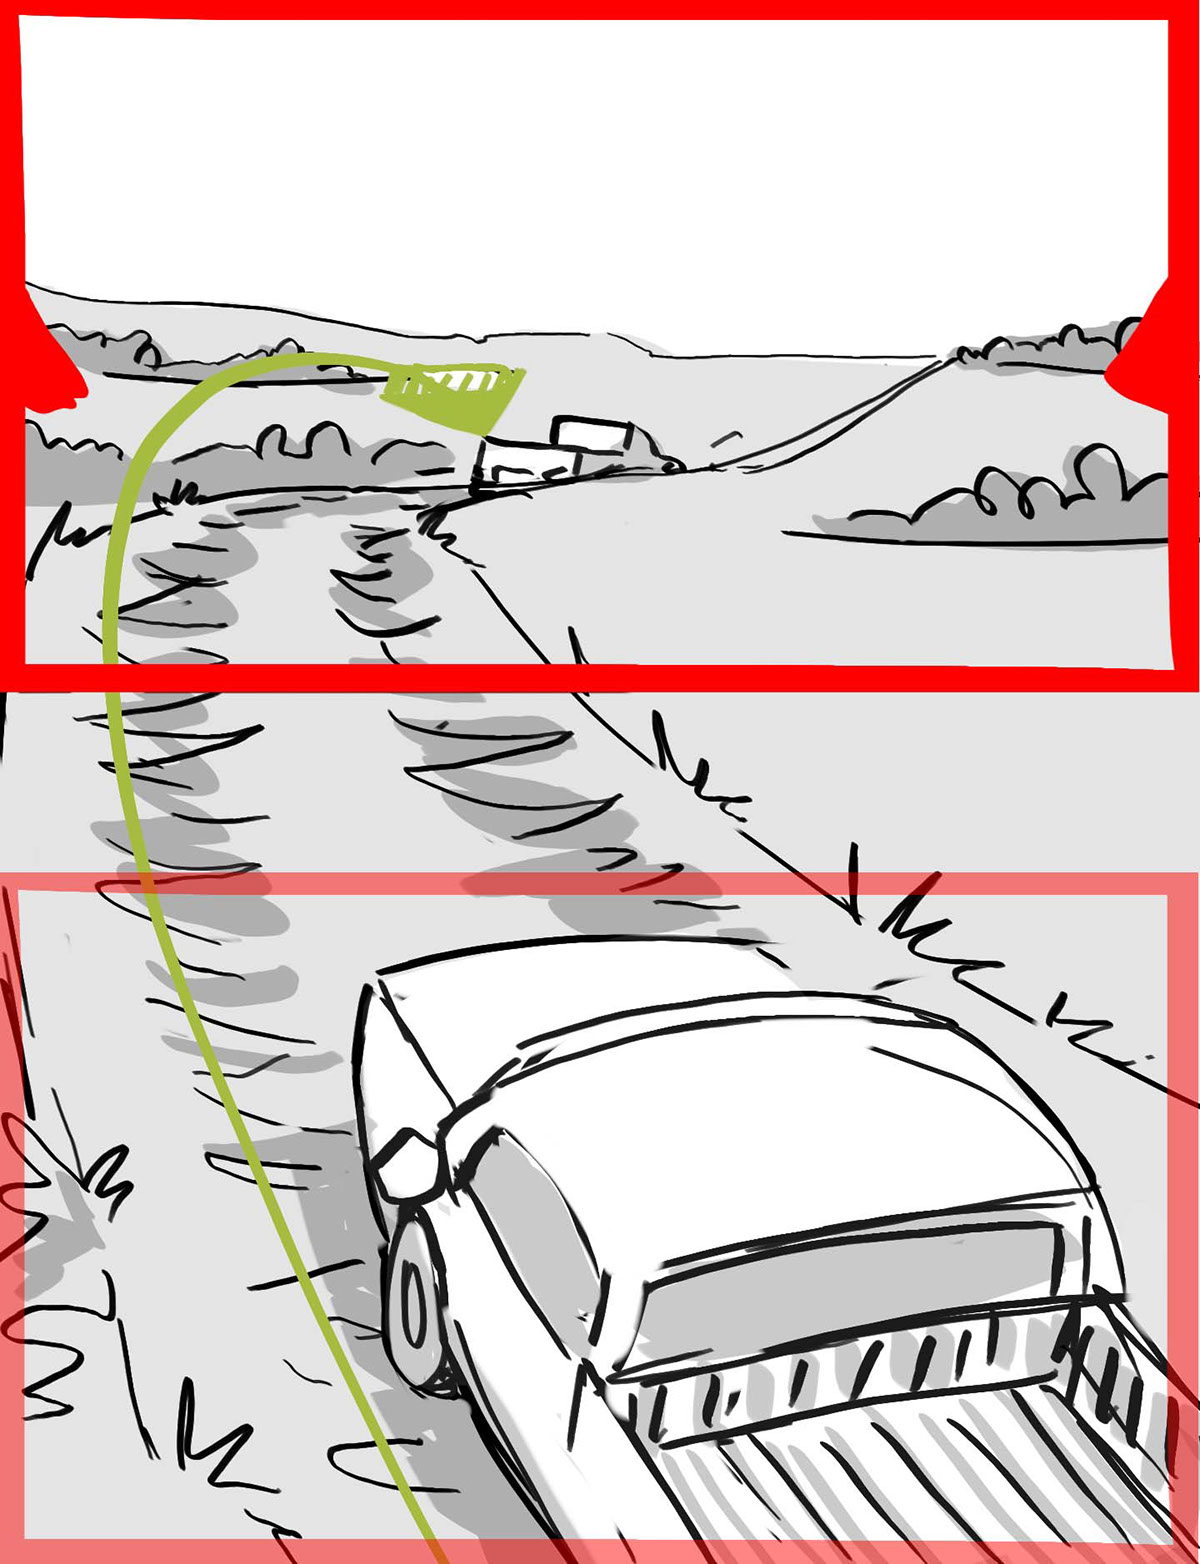 Driving Cars ads Storyboards commercial black and white Digital sketching sketching